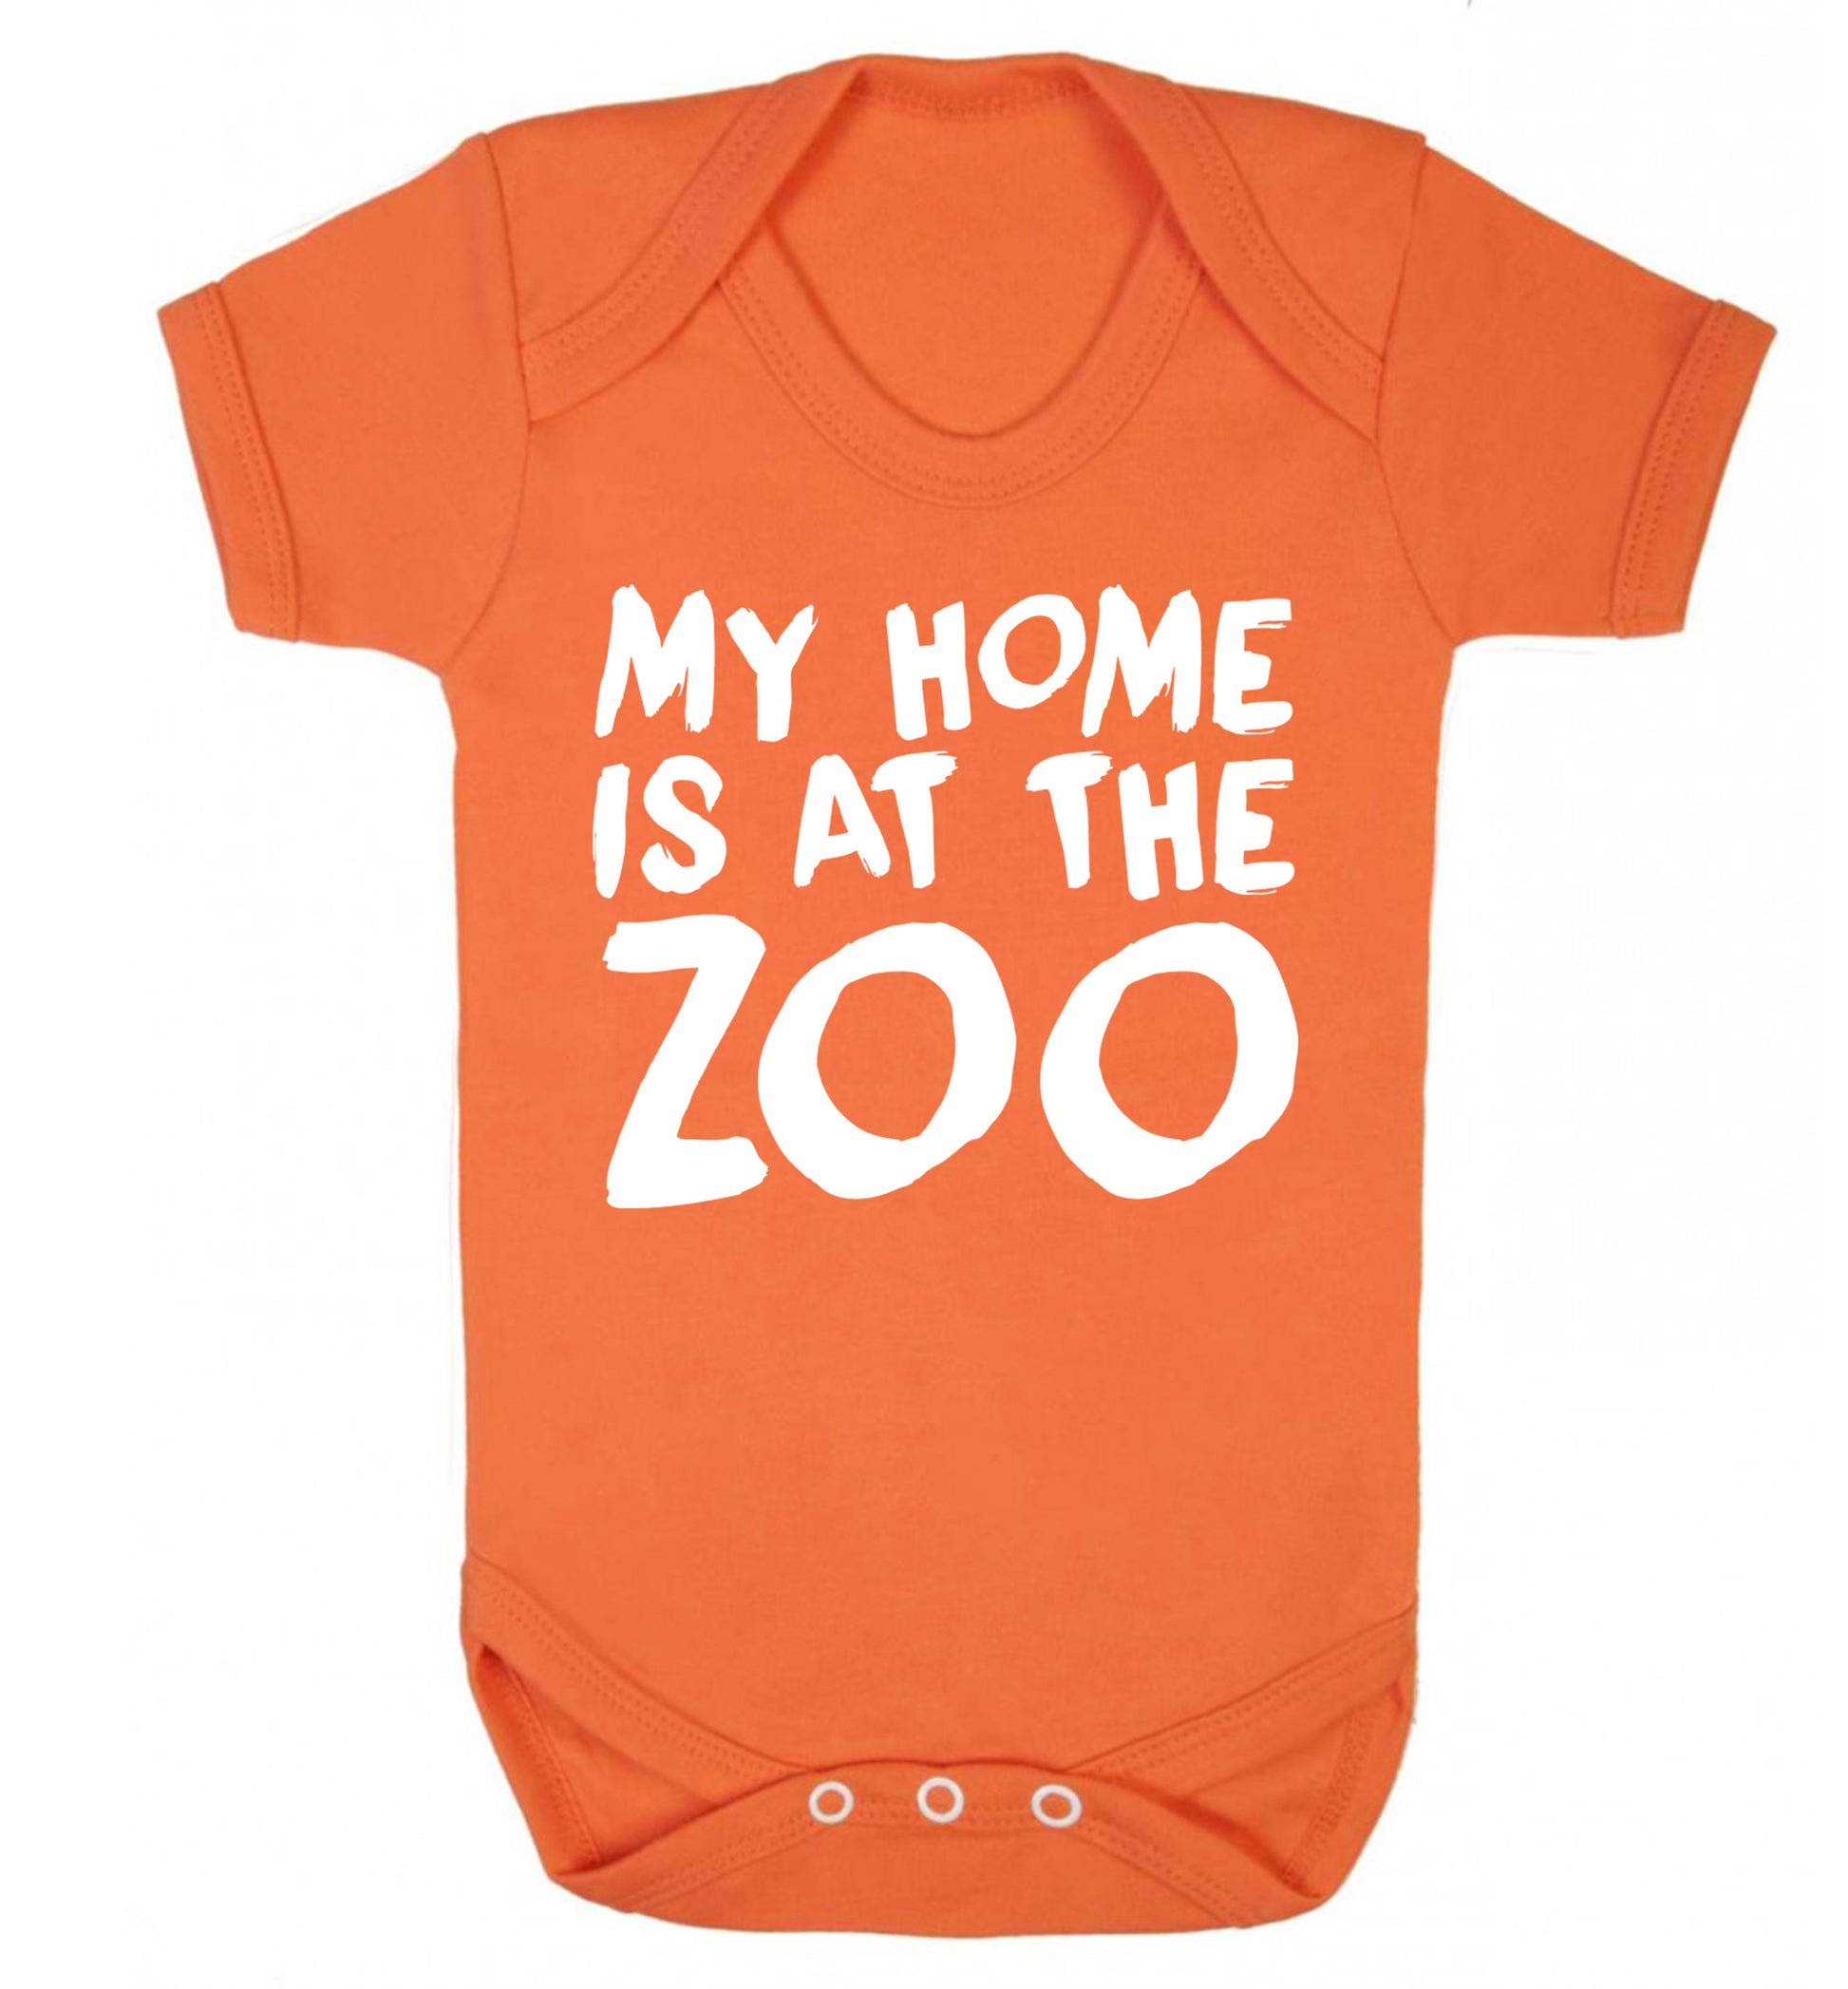 My home is at the zoo Baby Vest orange 18-24 months